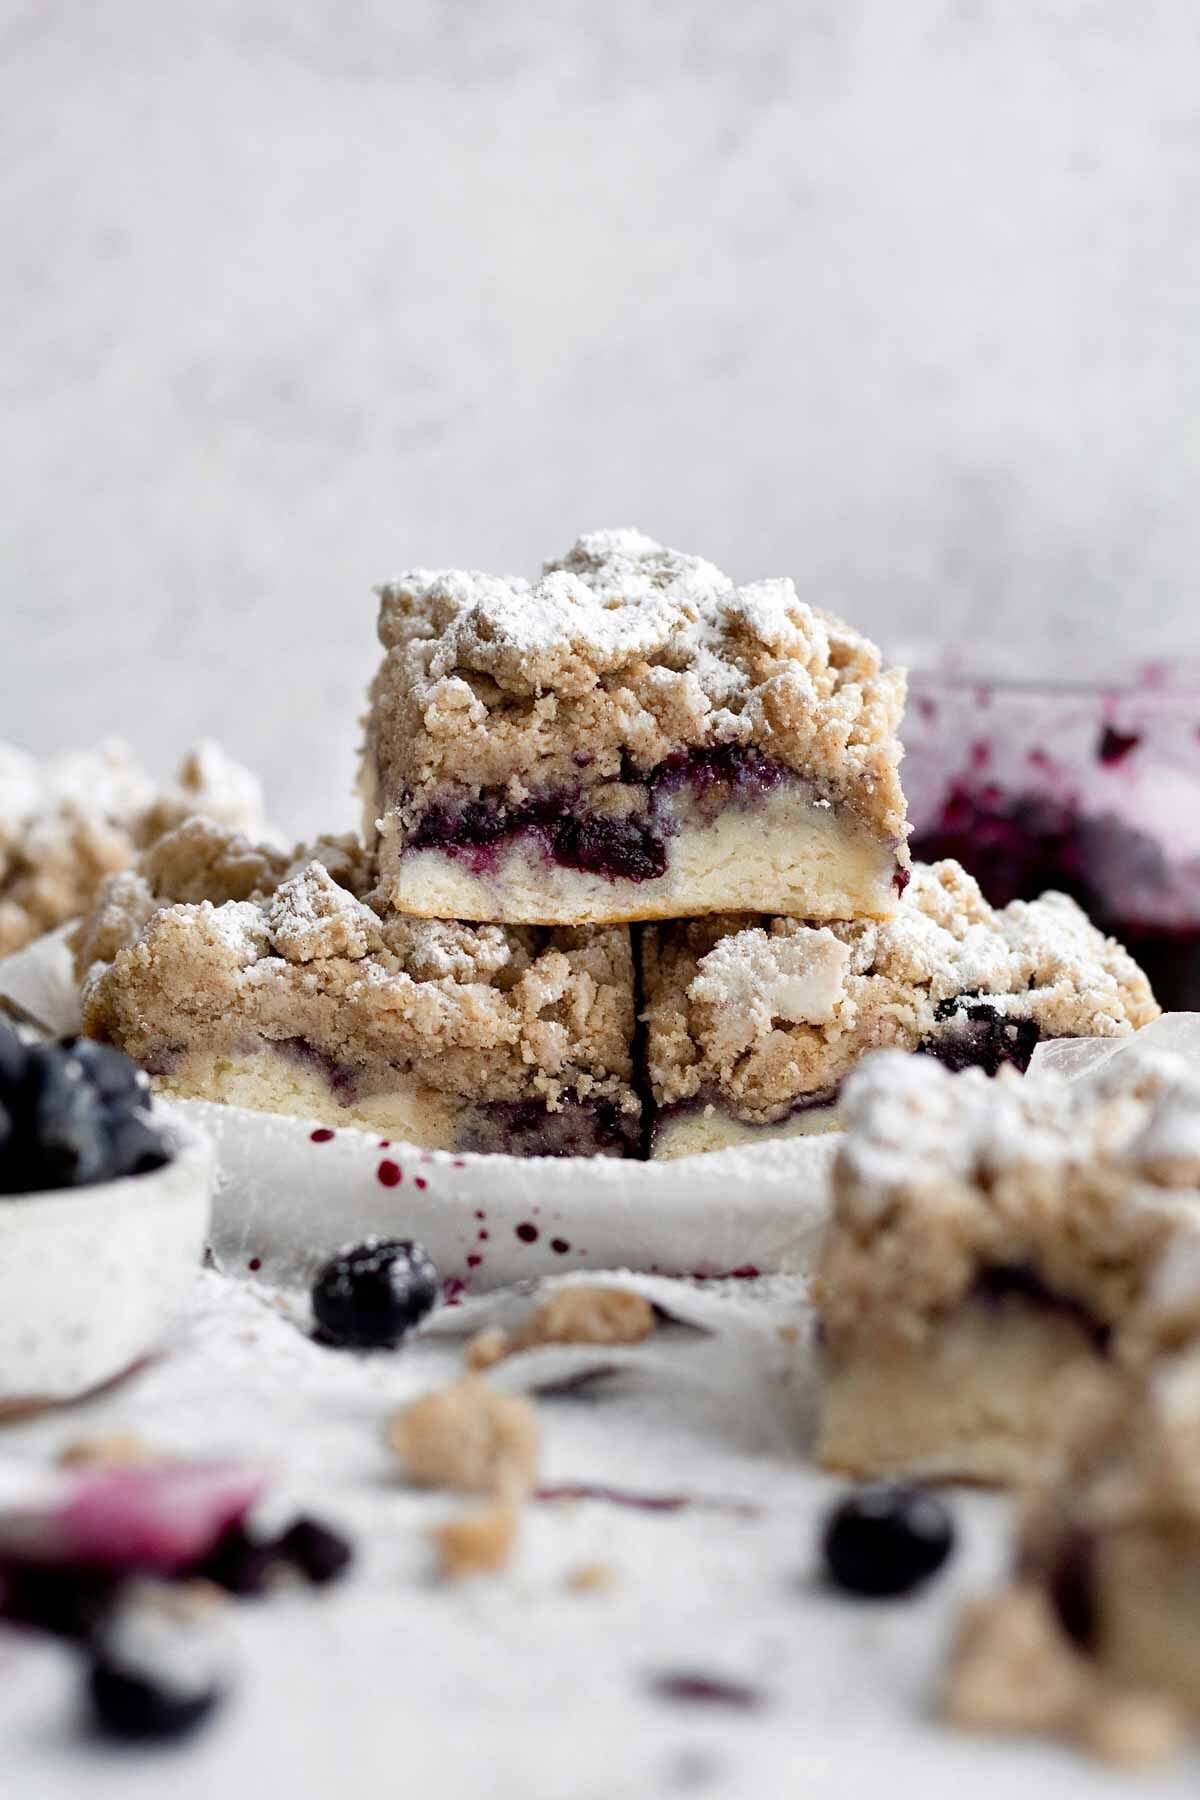 A trio of powdered Blueberry Crumb Cakes rises from the plate.